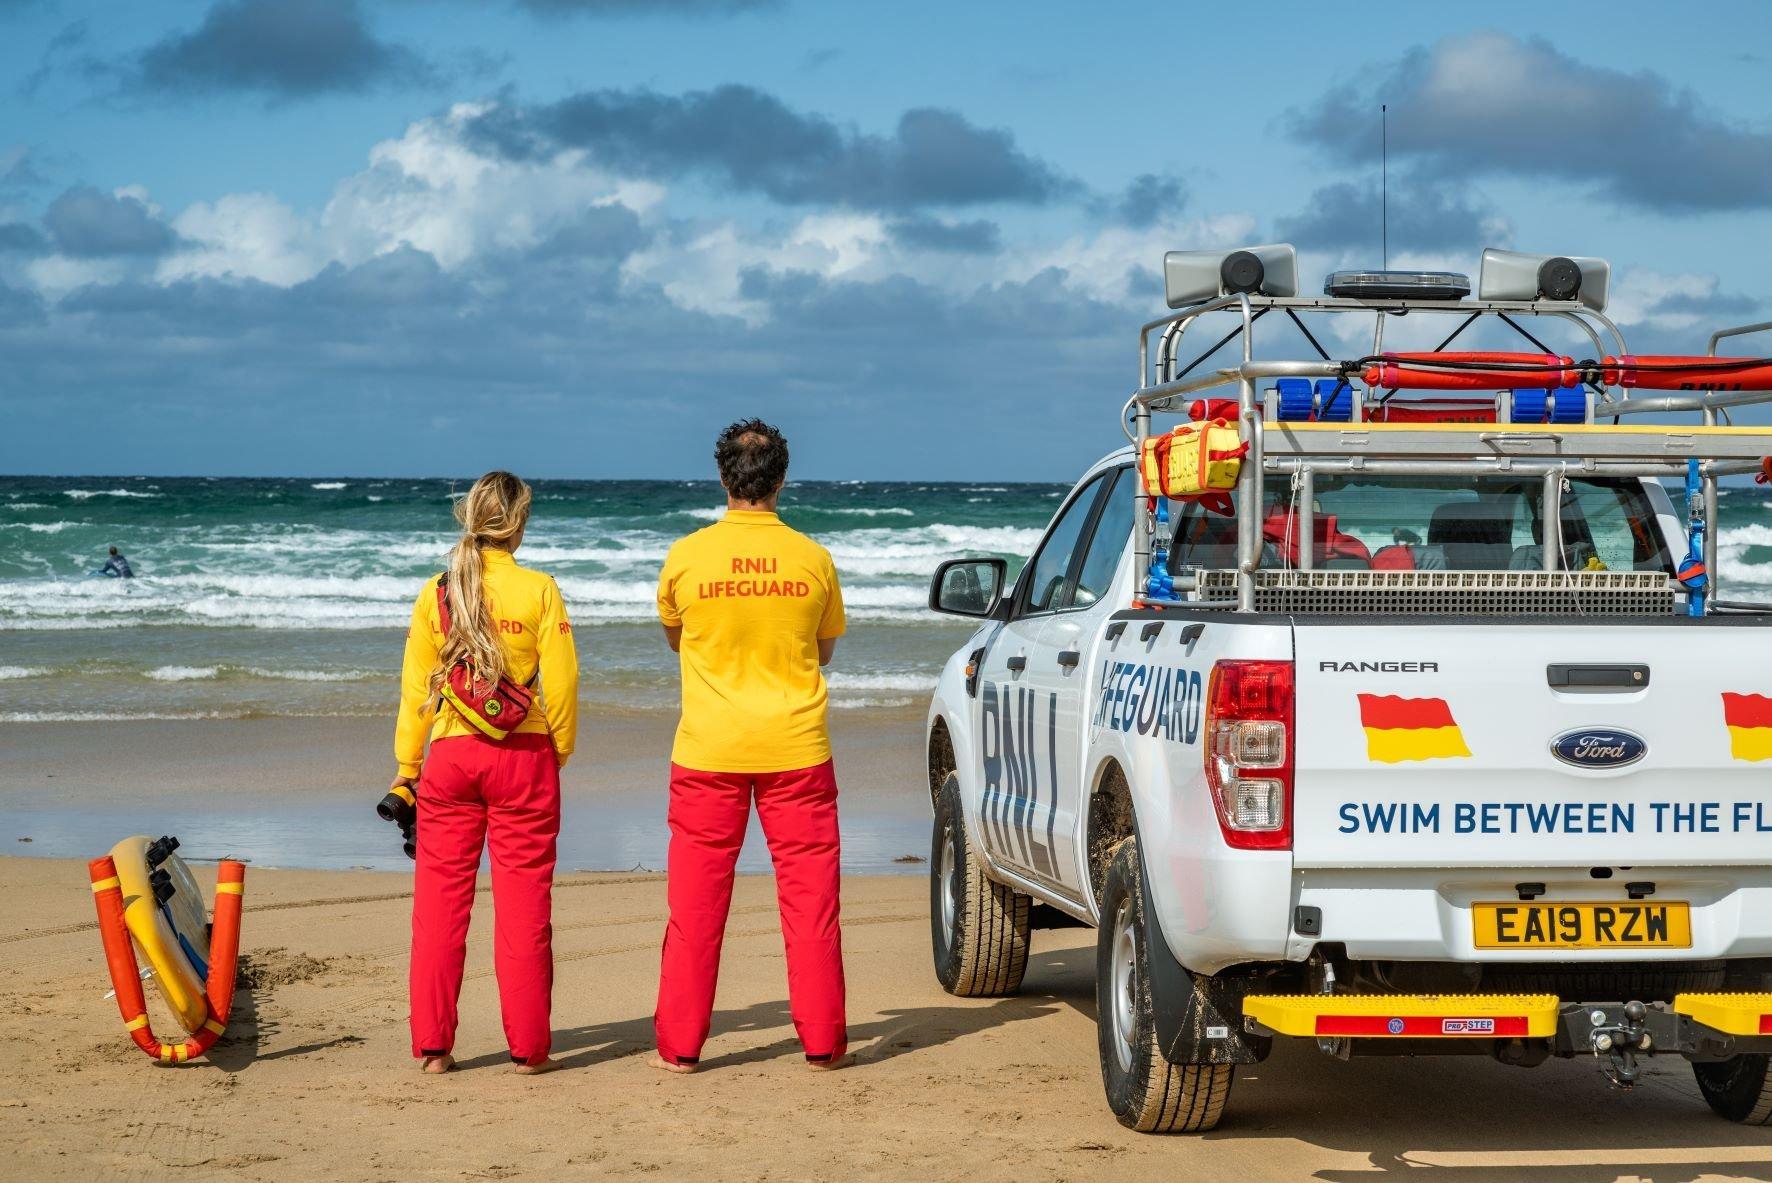 Wanted: RNLI are on the lookout for new lifesavers